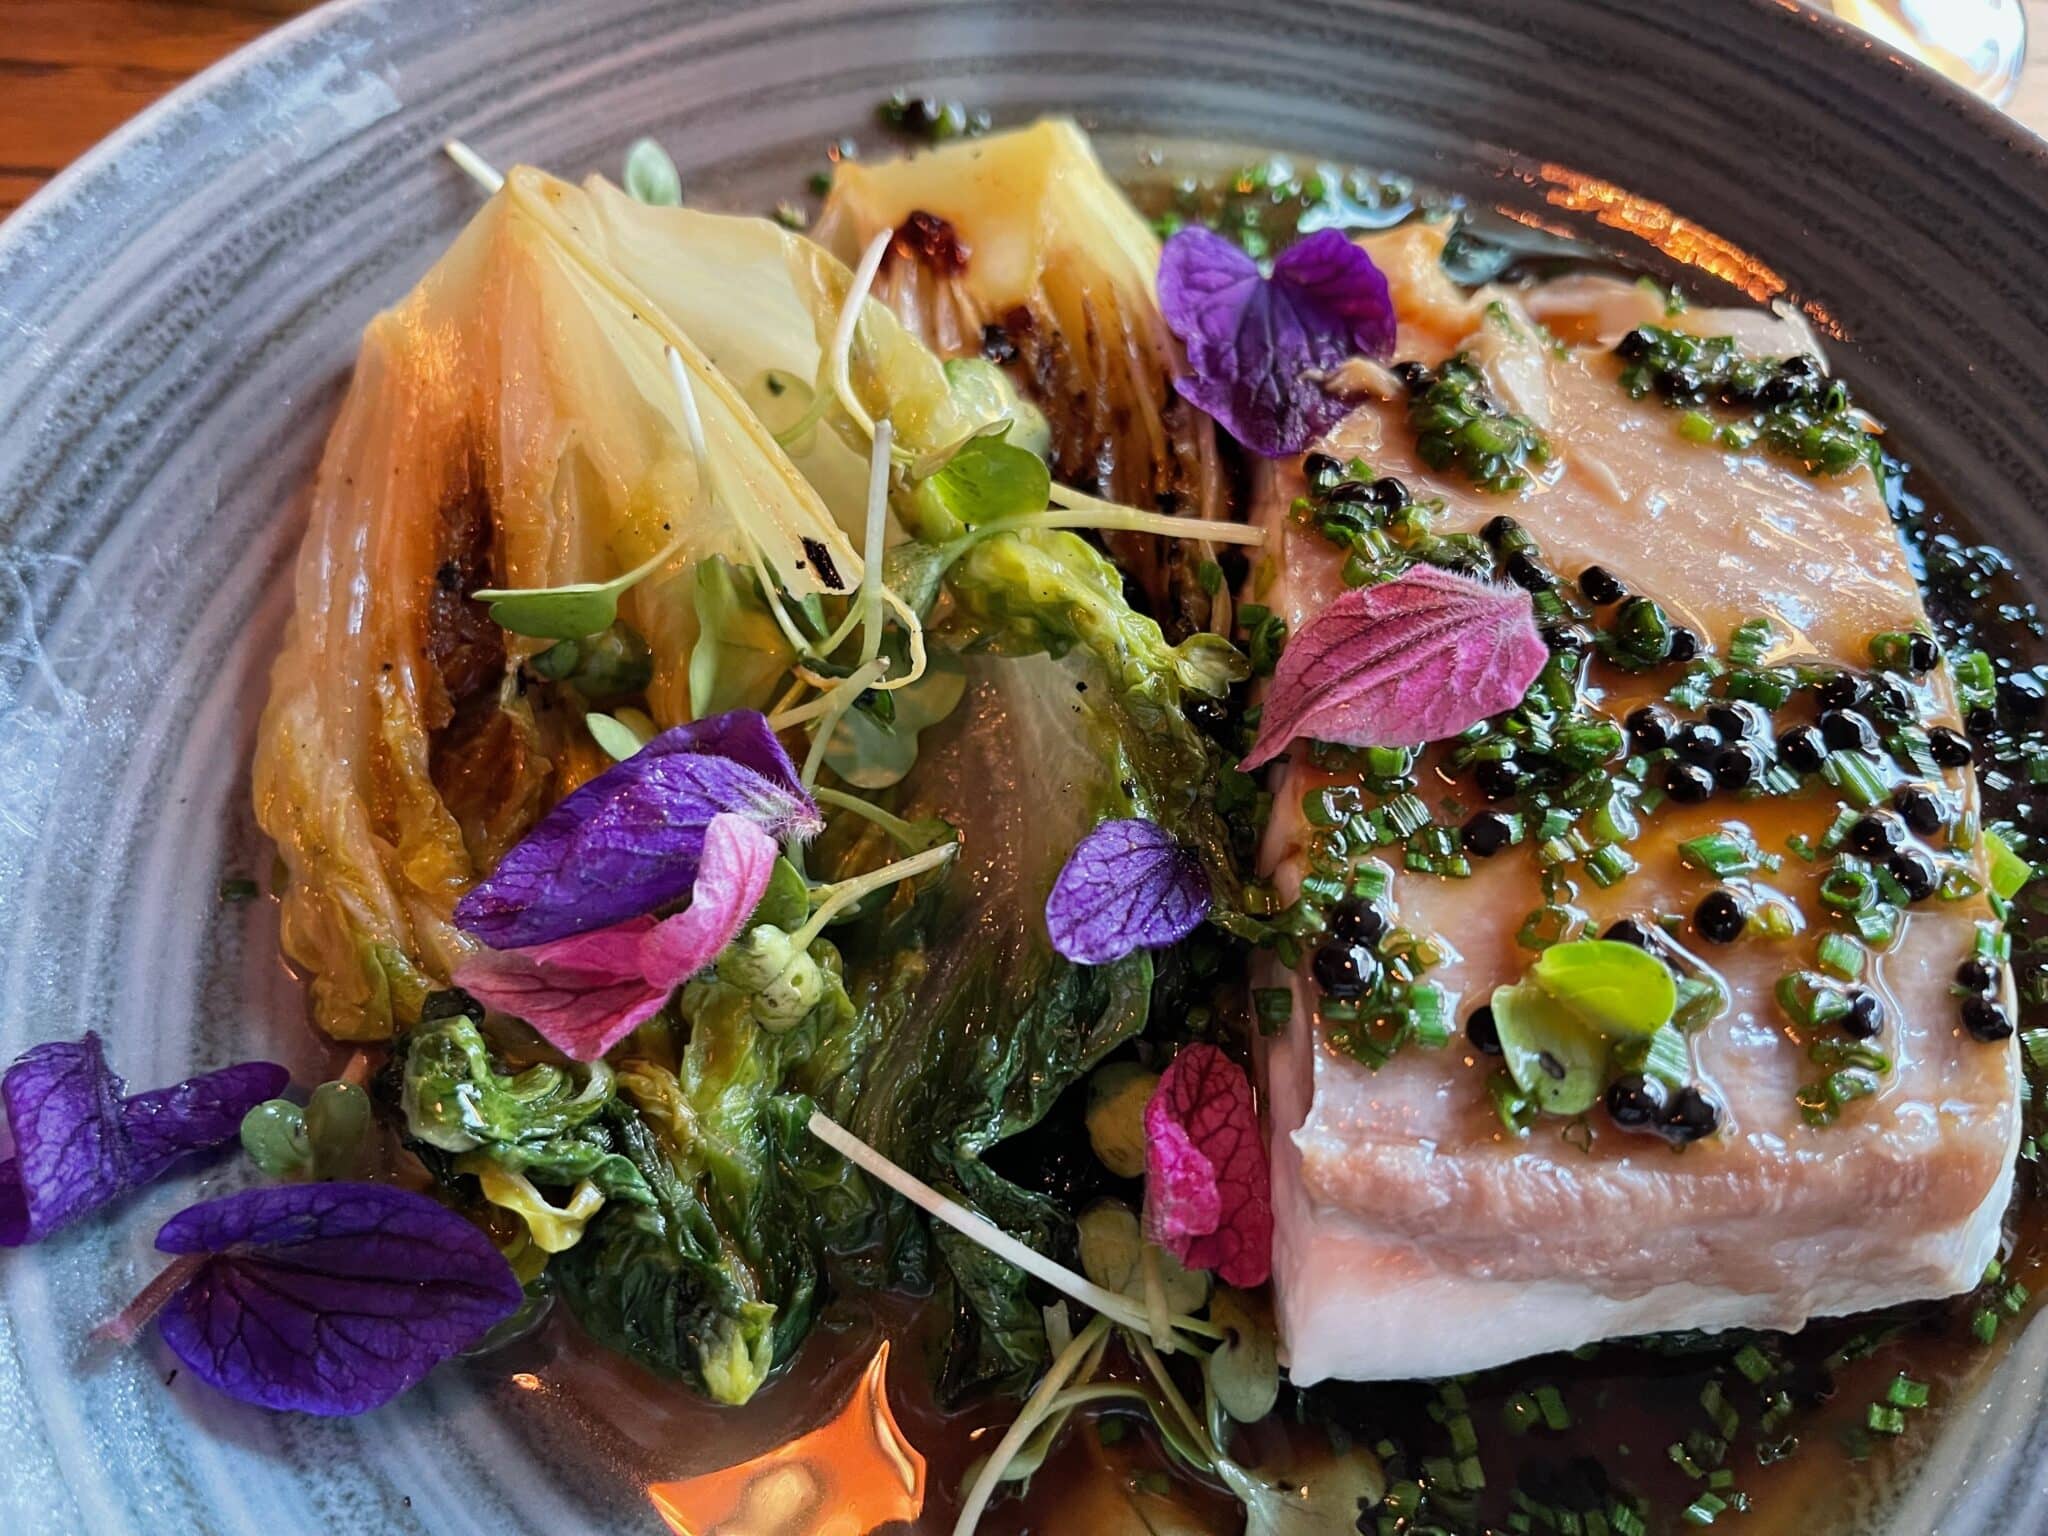 Artic char and capers and endive and flowers